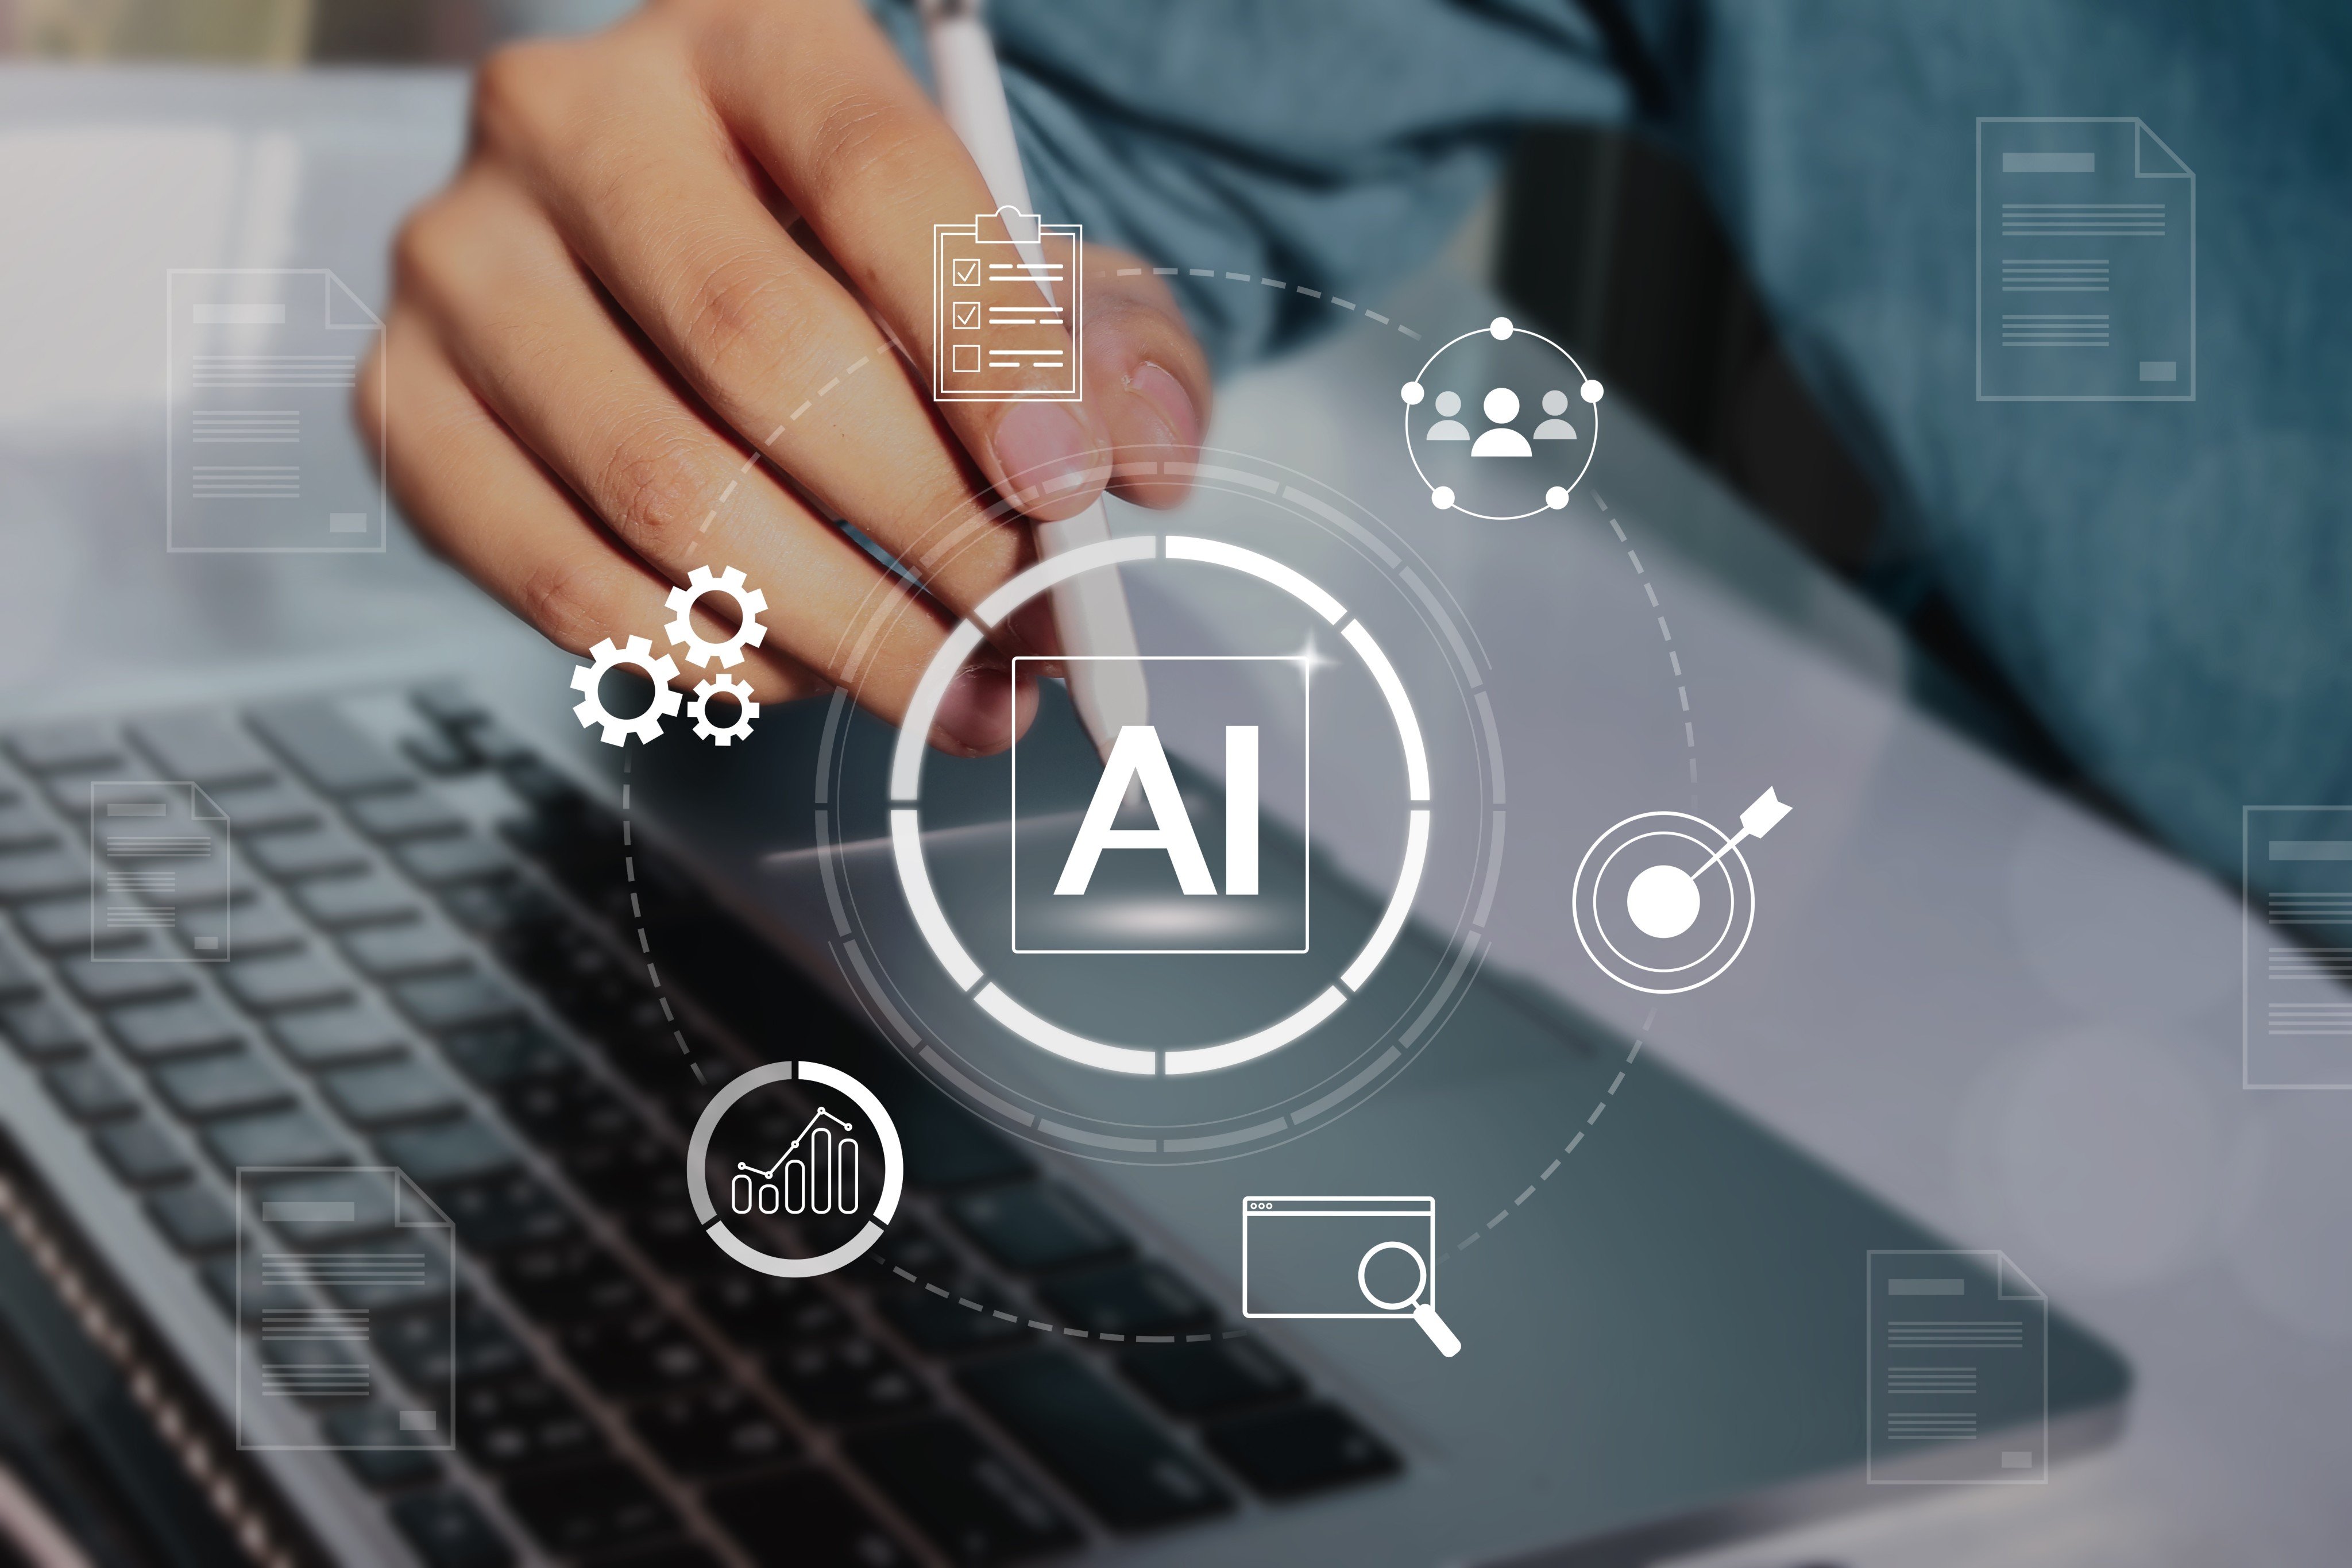 Some civil servants in China are turning to AI writing tools to ease their workload. Photo: Shutterstock